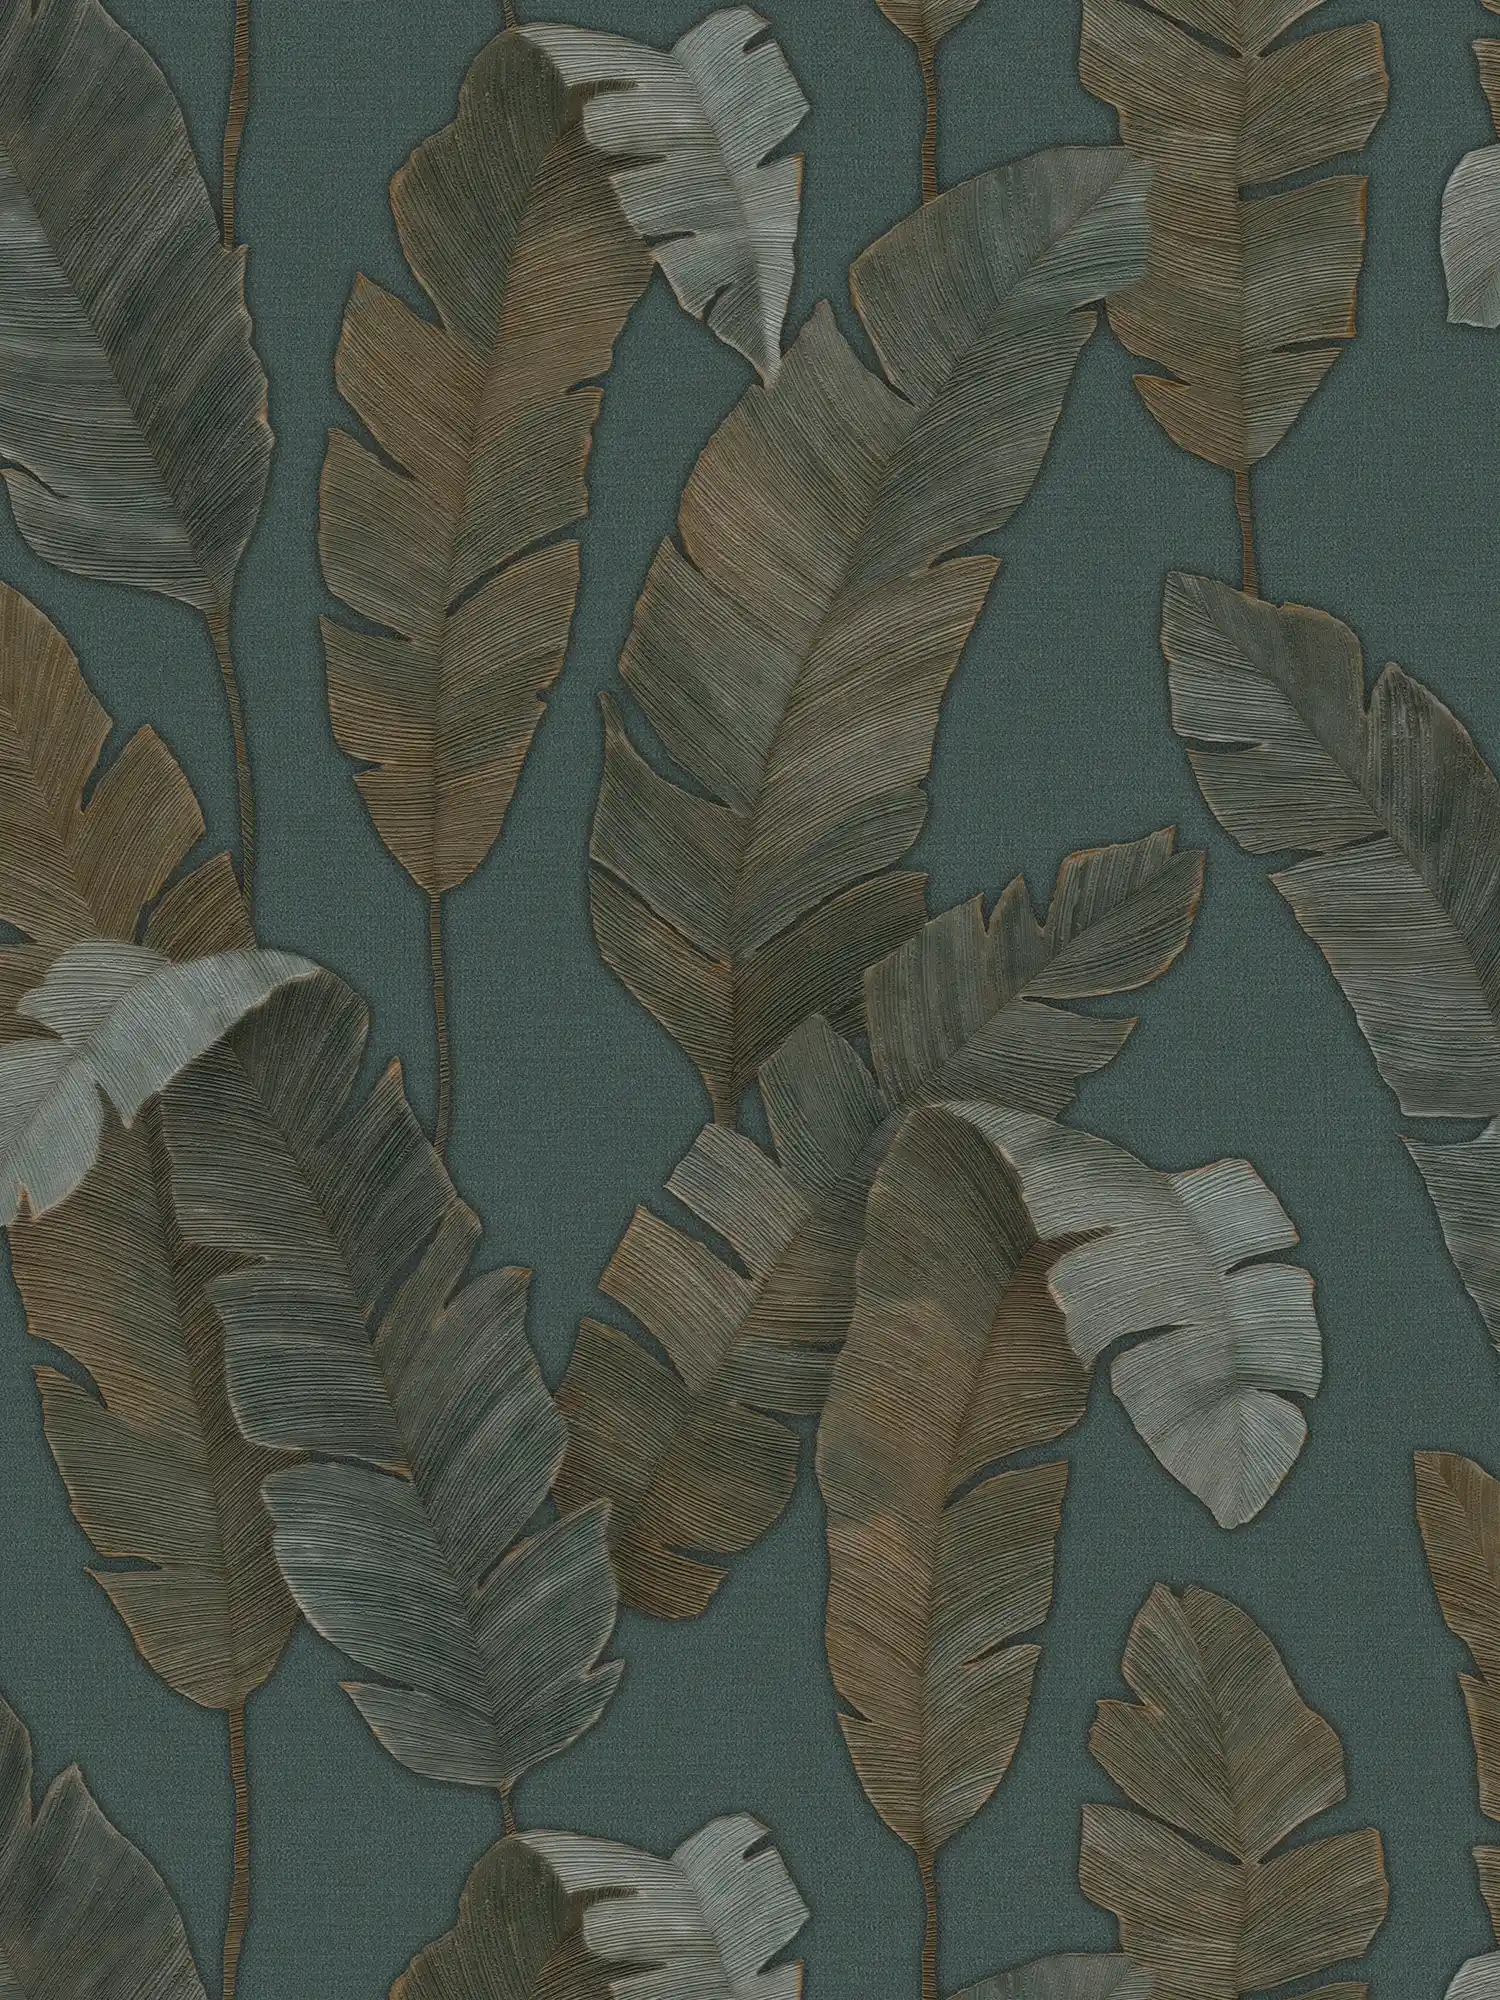 Non-woven wallpaper with large palm leaves in dark colour - petrol, green, brown
